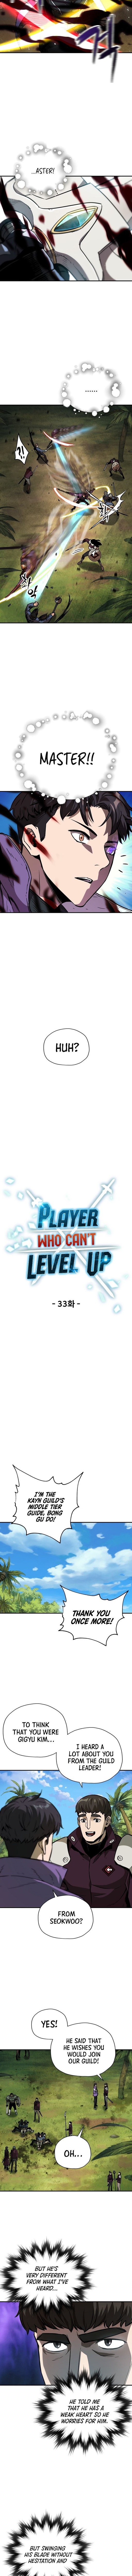 Player Who Cant Level Up 33 3